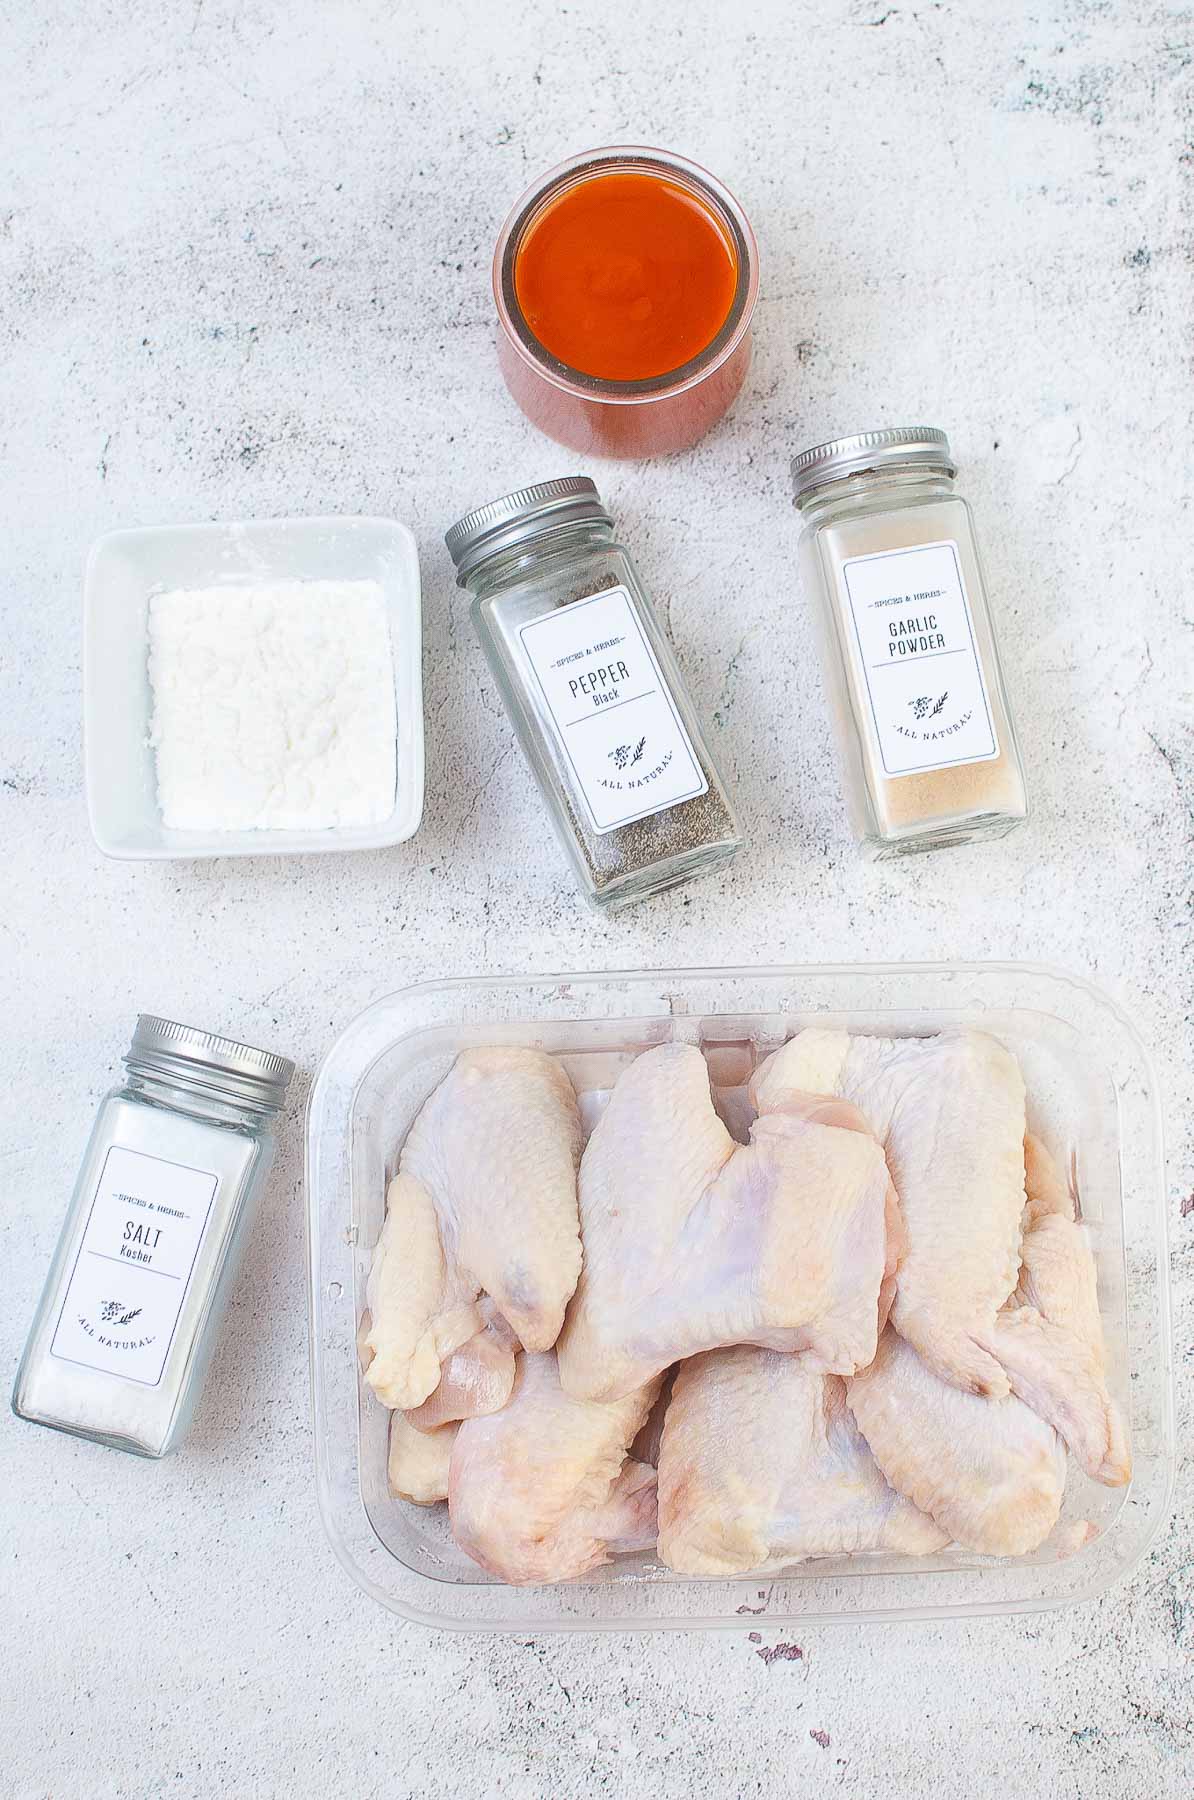 ingredients for buffalo wings - container of uncooked chicken wings, salt, pepper, garlic powder, buffalo sauce and corn starch.